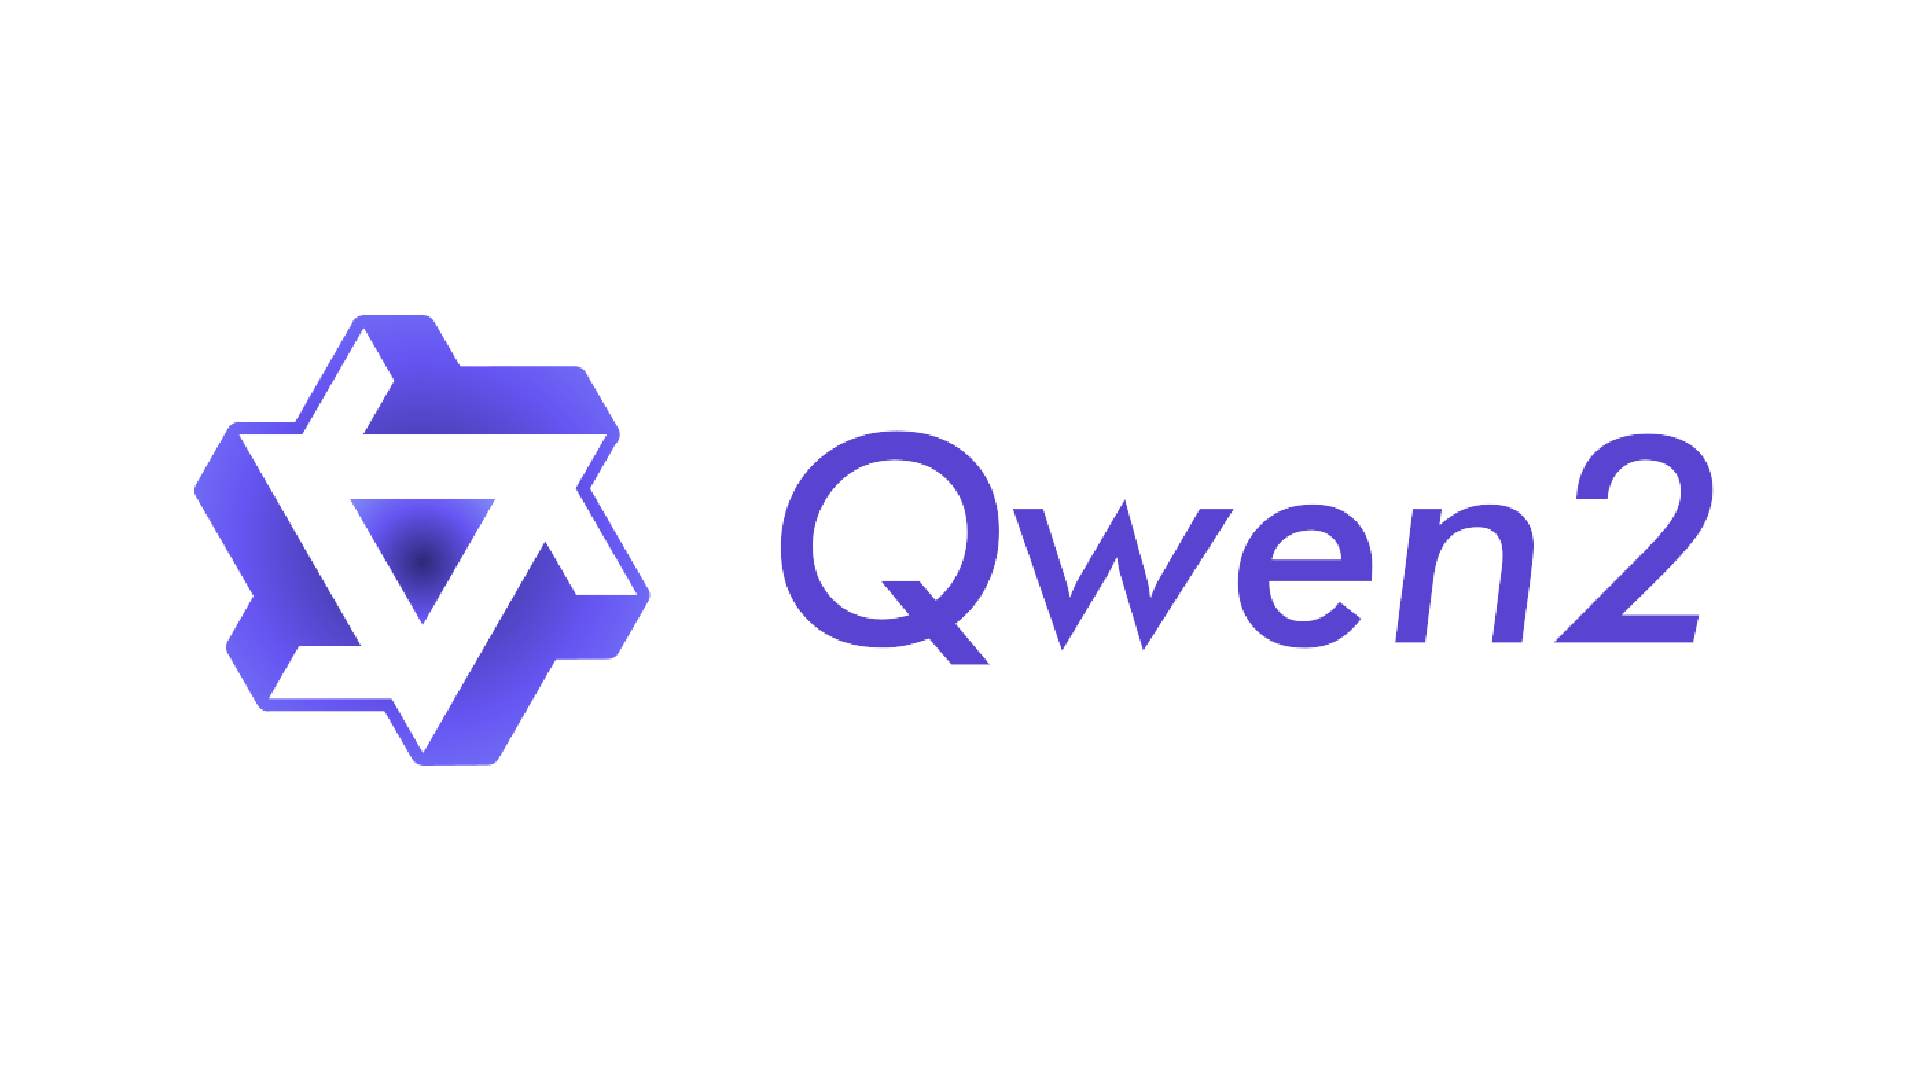 Alibaba's Qwen2 sets new standards for open source language models